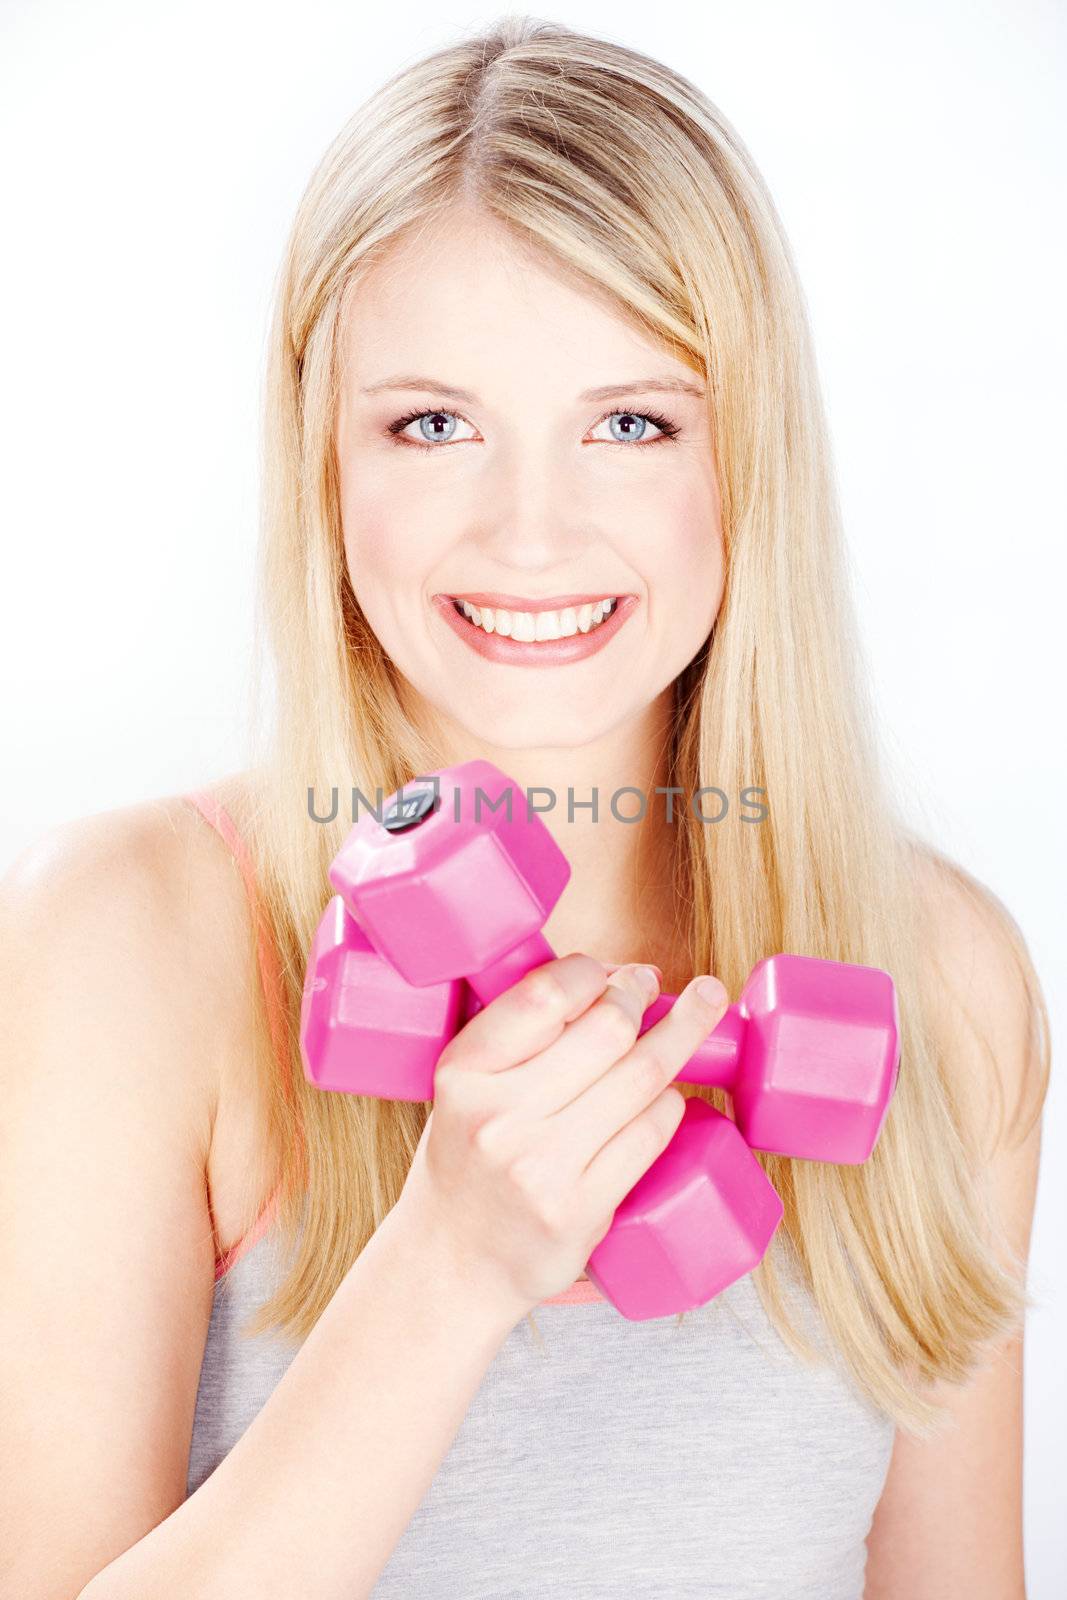 Young smiled woman holding two weights in one hand